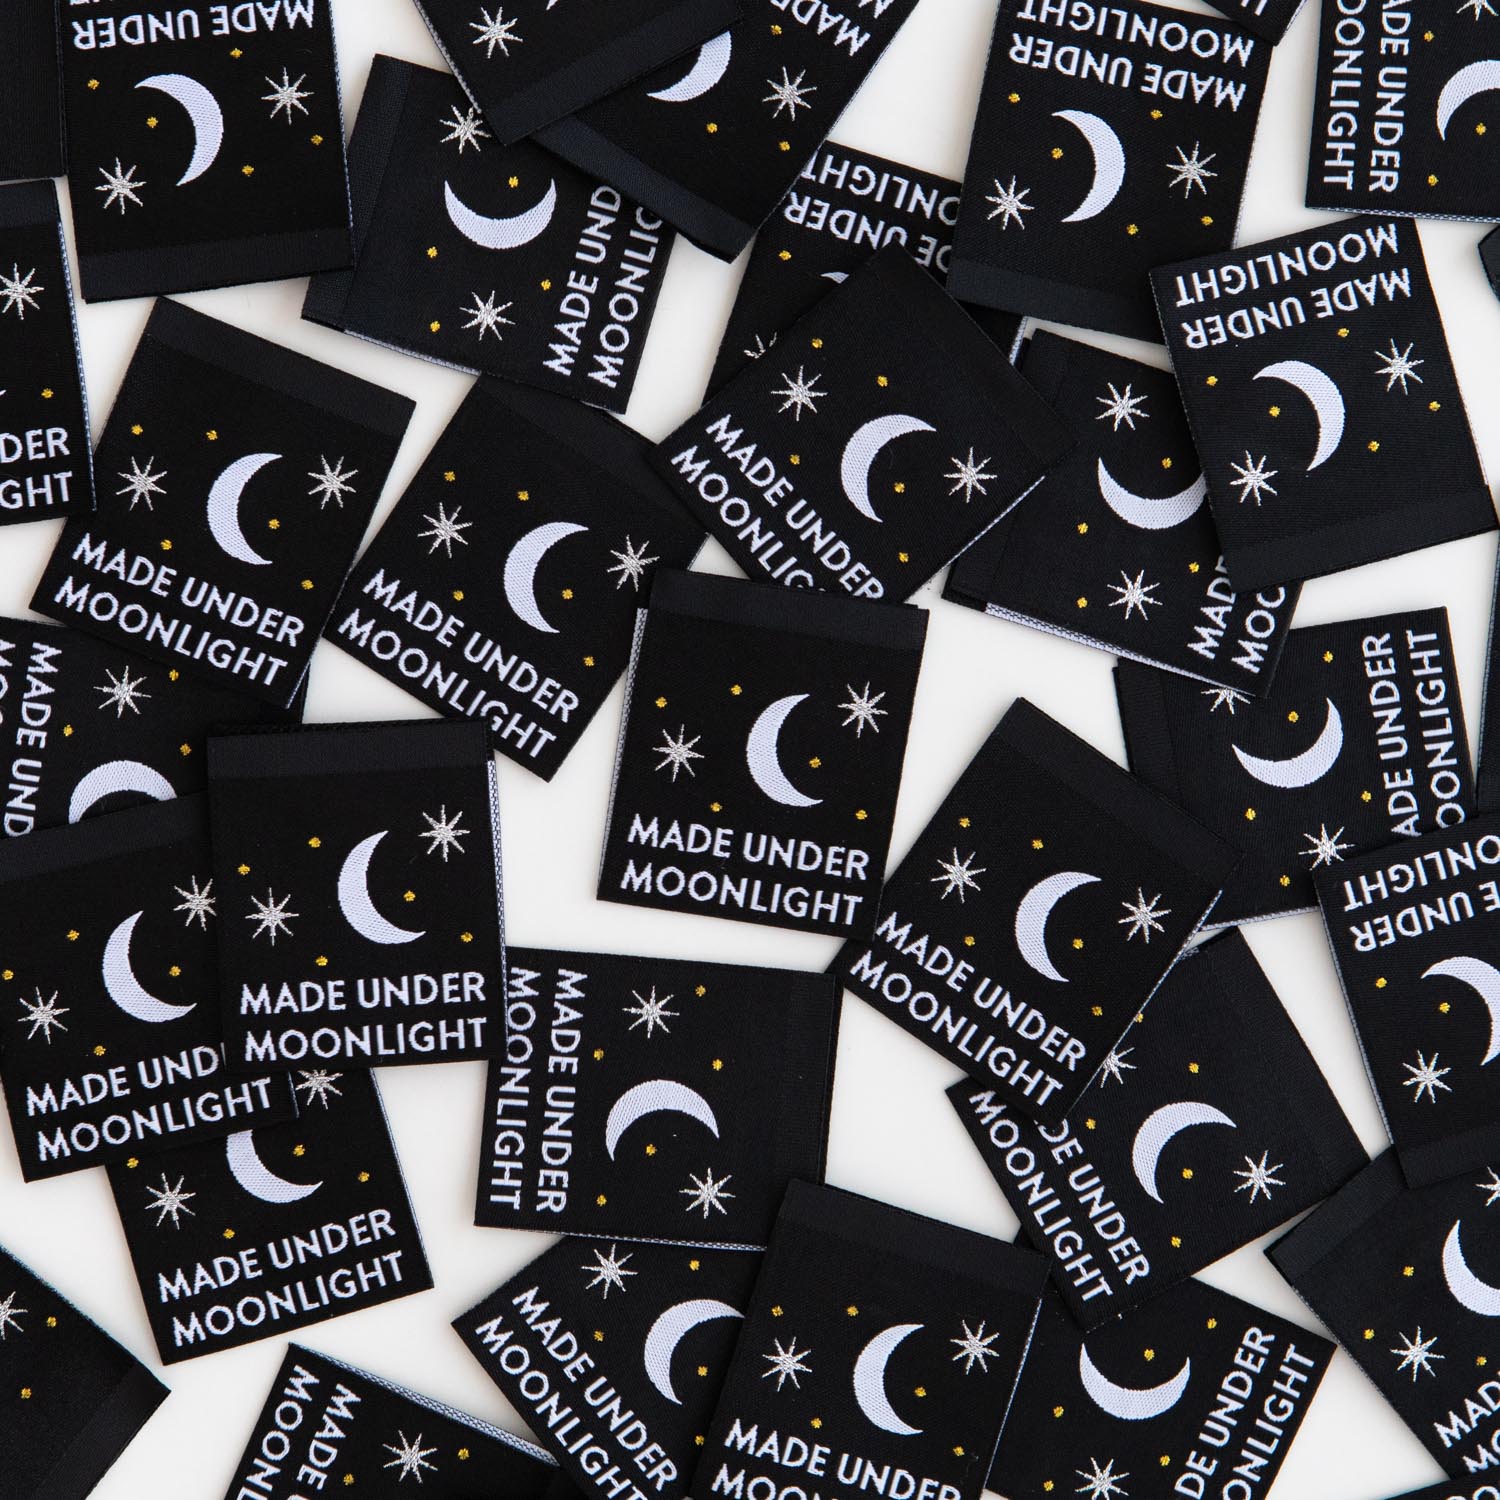 Made Under Moonlight Woven Labels - Sewing Woven Clothing Ta